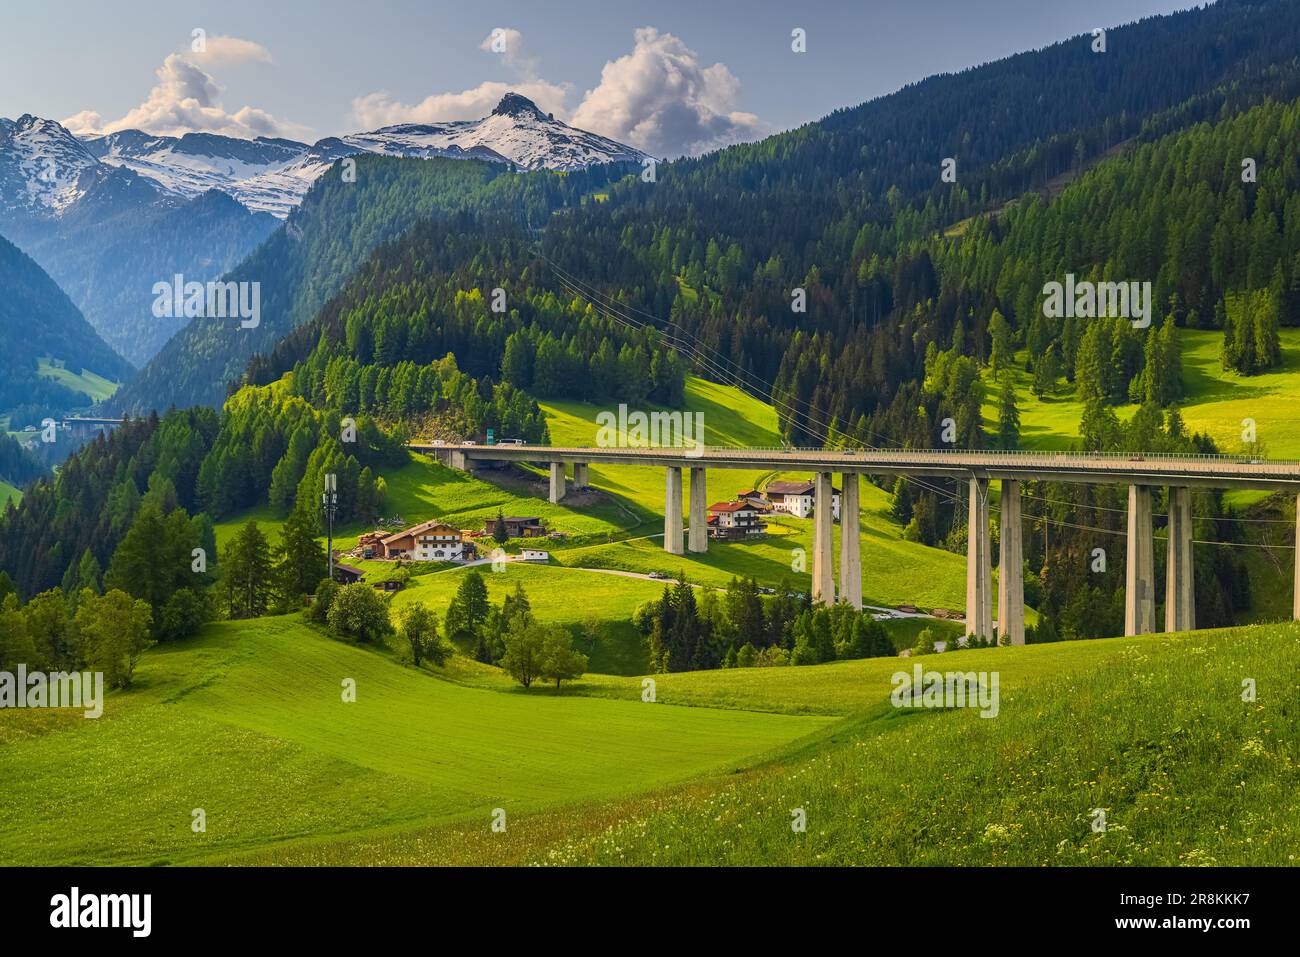 The Brenner Pass, shortly Brenner; (Italian: Passo del Brennero) is a mountain pass through the Alps which forms the border between Italy and Austria. Stock Photo